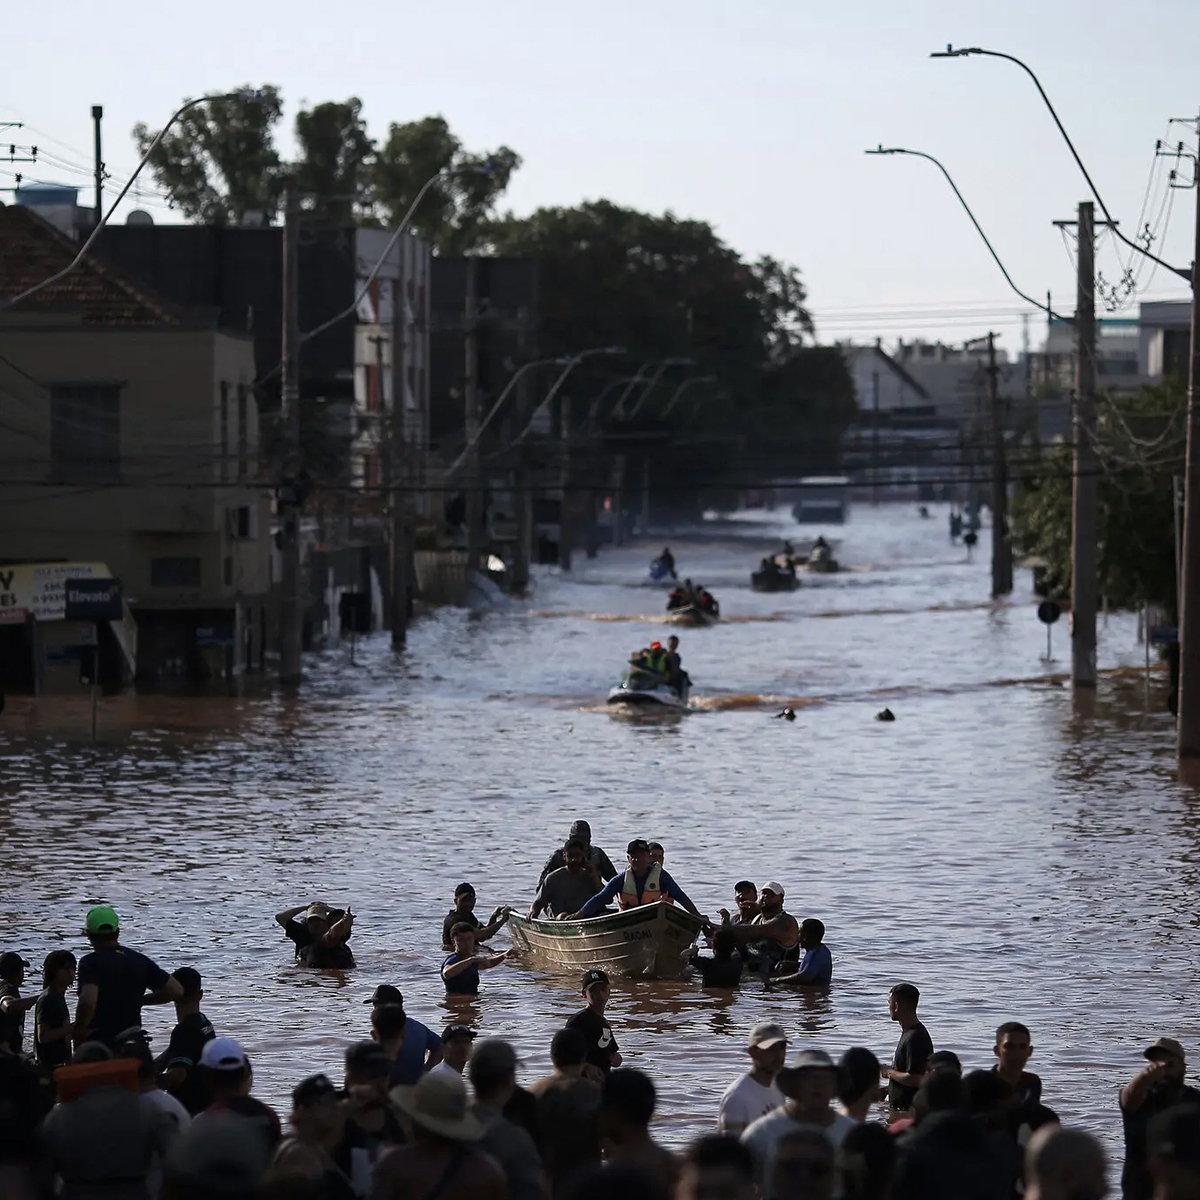 Facing the worst flooding in recent memory, Rio Grande do Sul is in urgent need of support and relief. Nearly 1.5 million people have been affected by the disaster, including at least 105 people who have lost their lives, another 130 still missing, and over 160,000 displaced from…